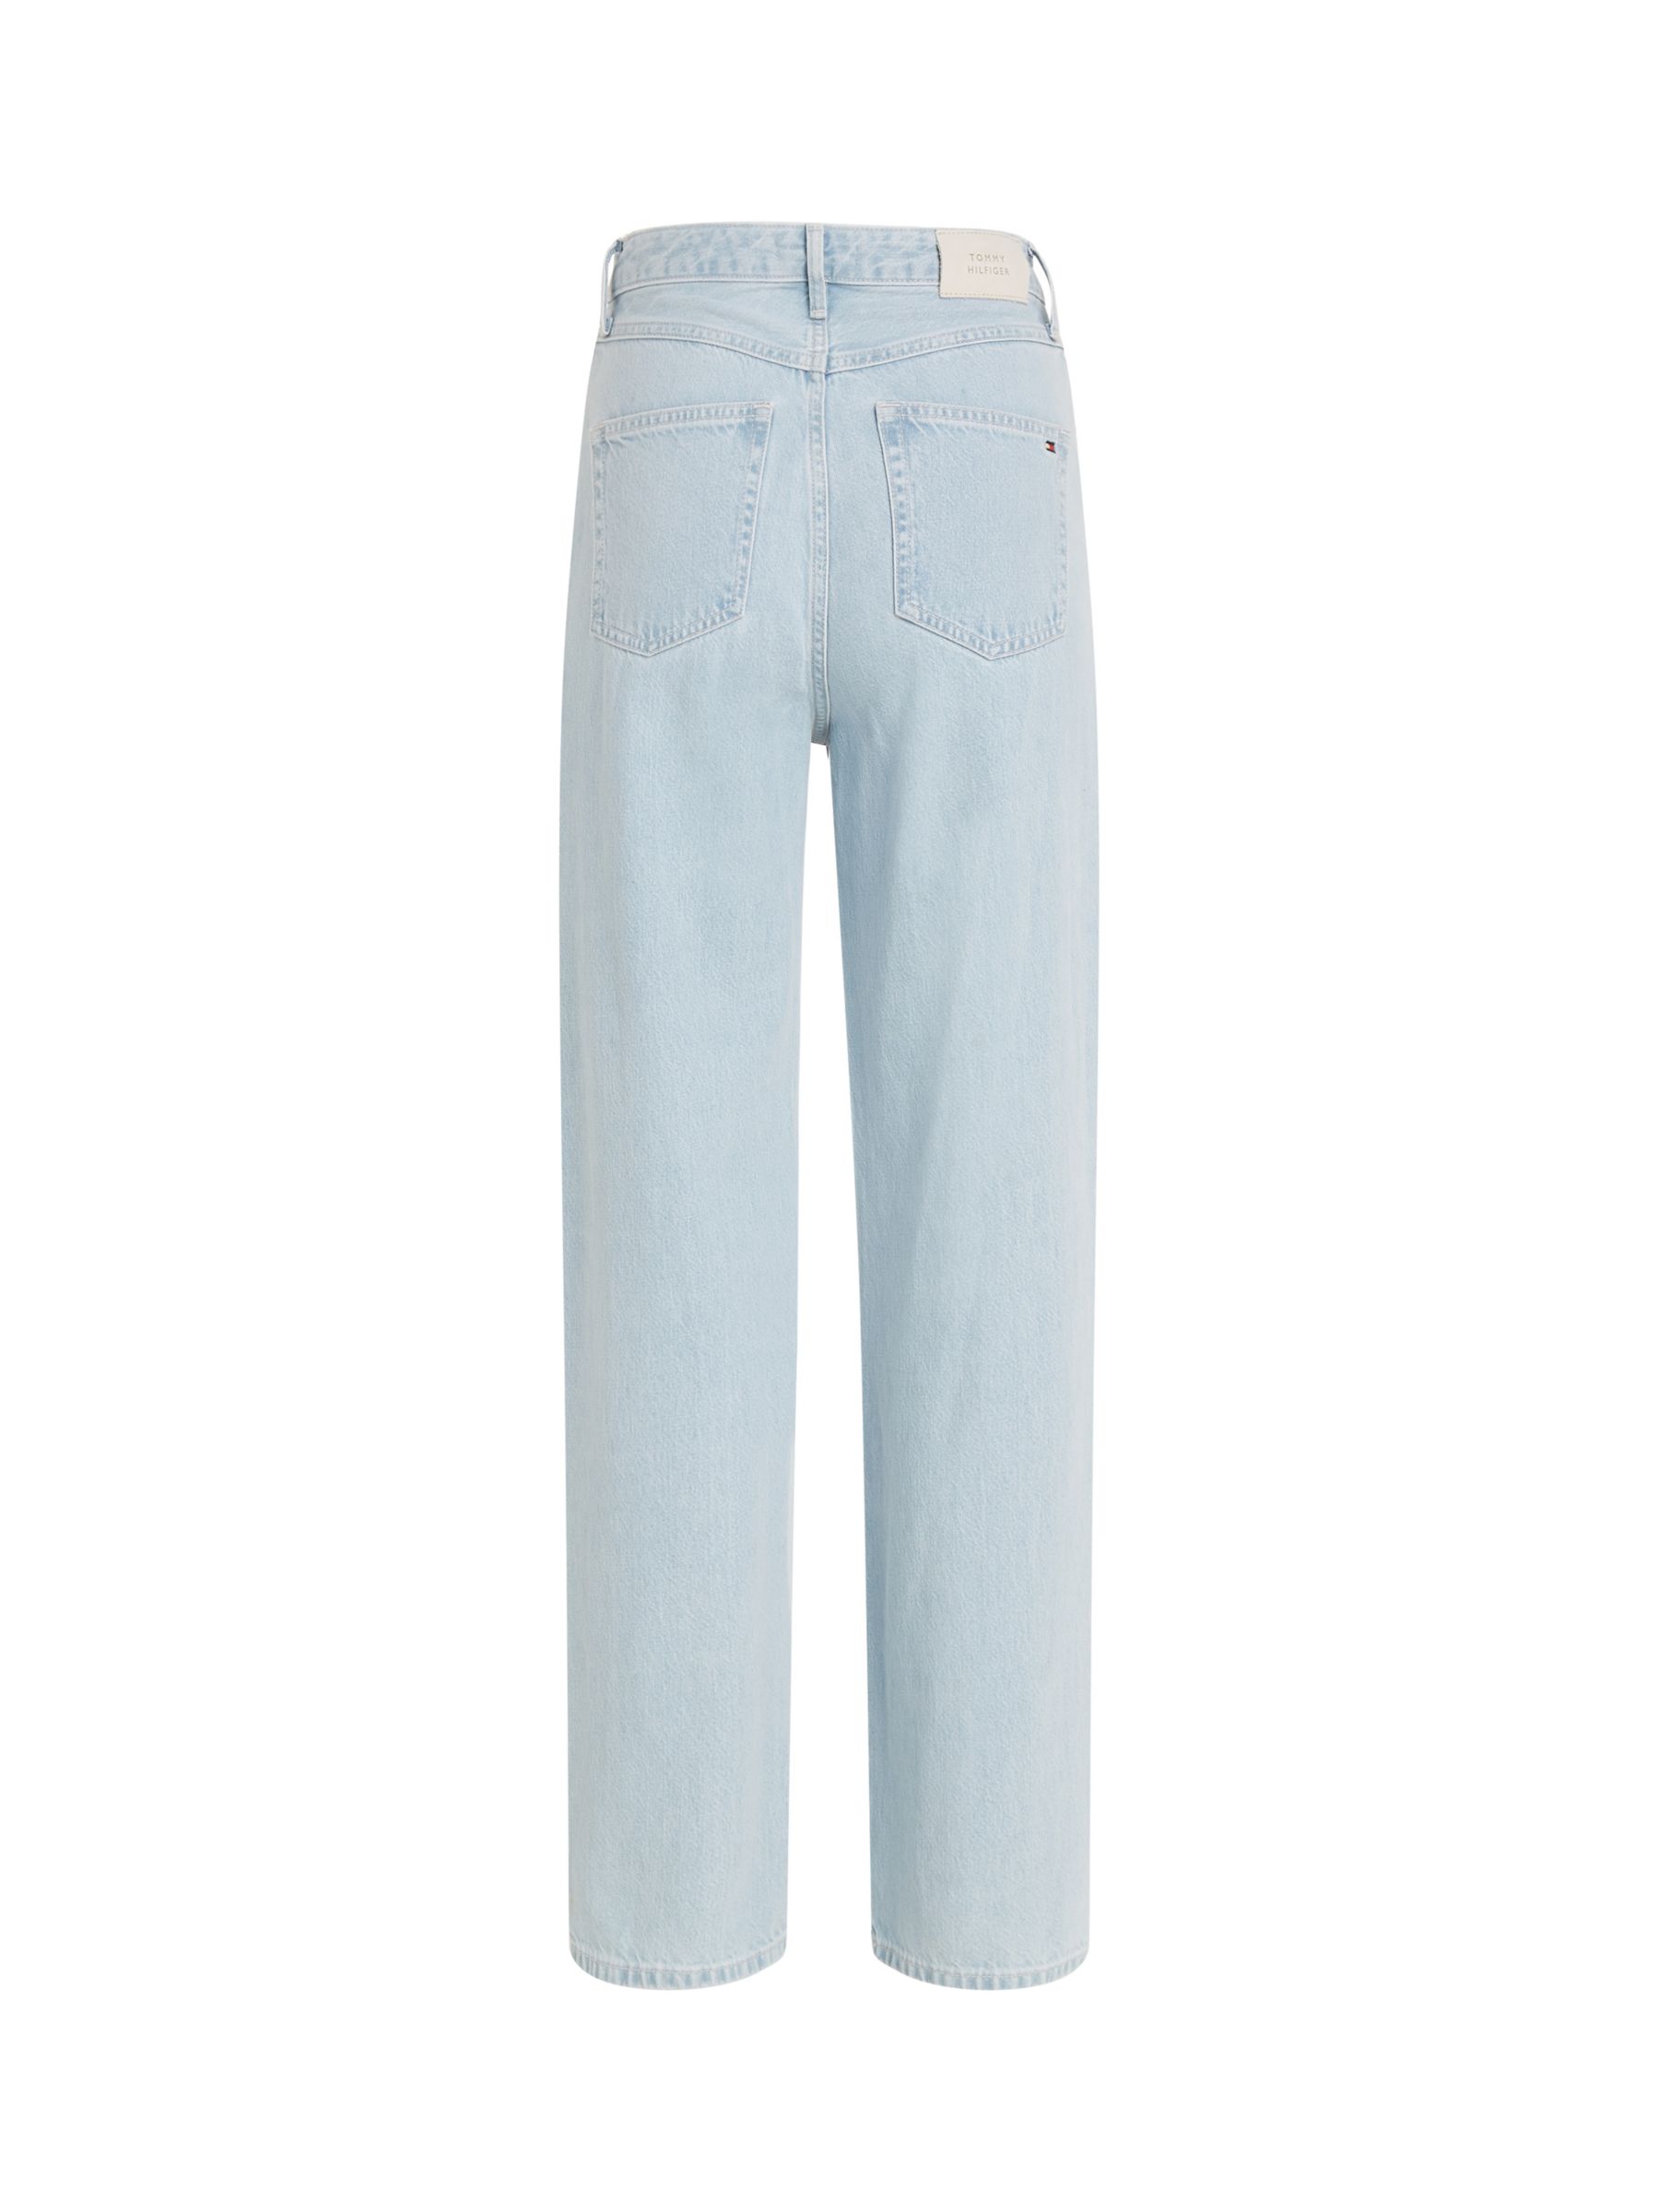 Tommy Hilfiger Relaxed Fit Straight Cut Jeans, Mia, 25R